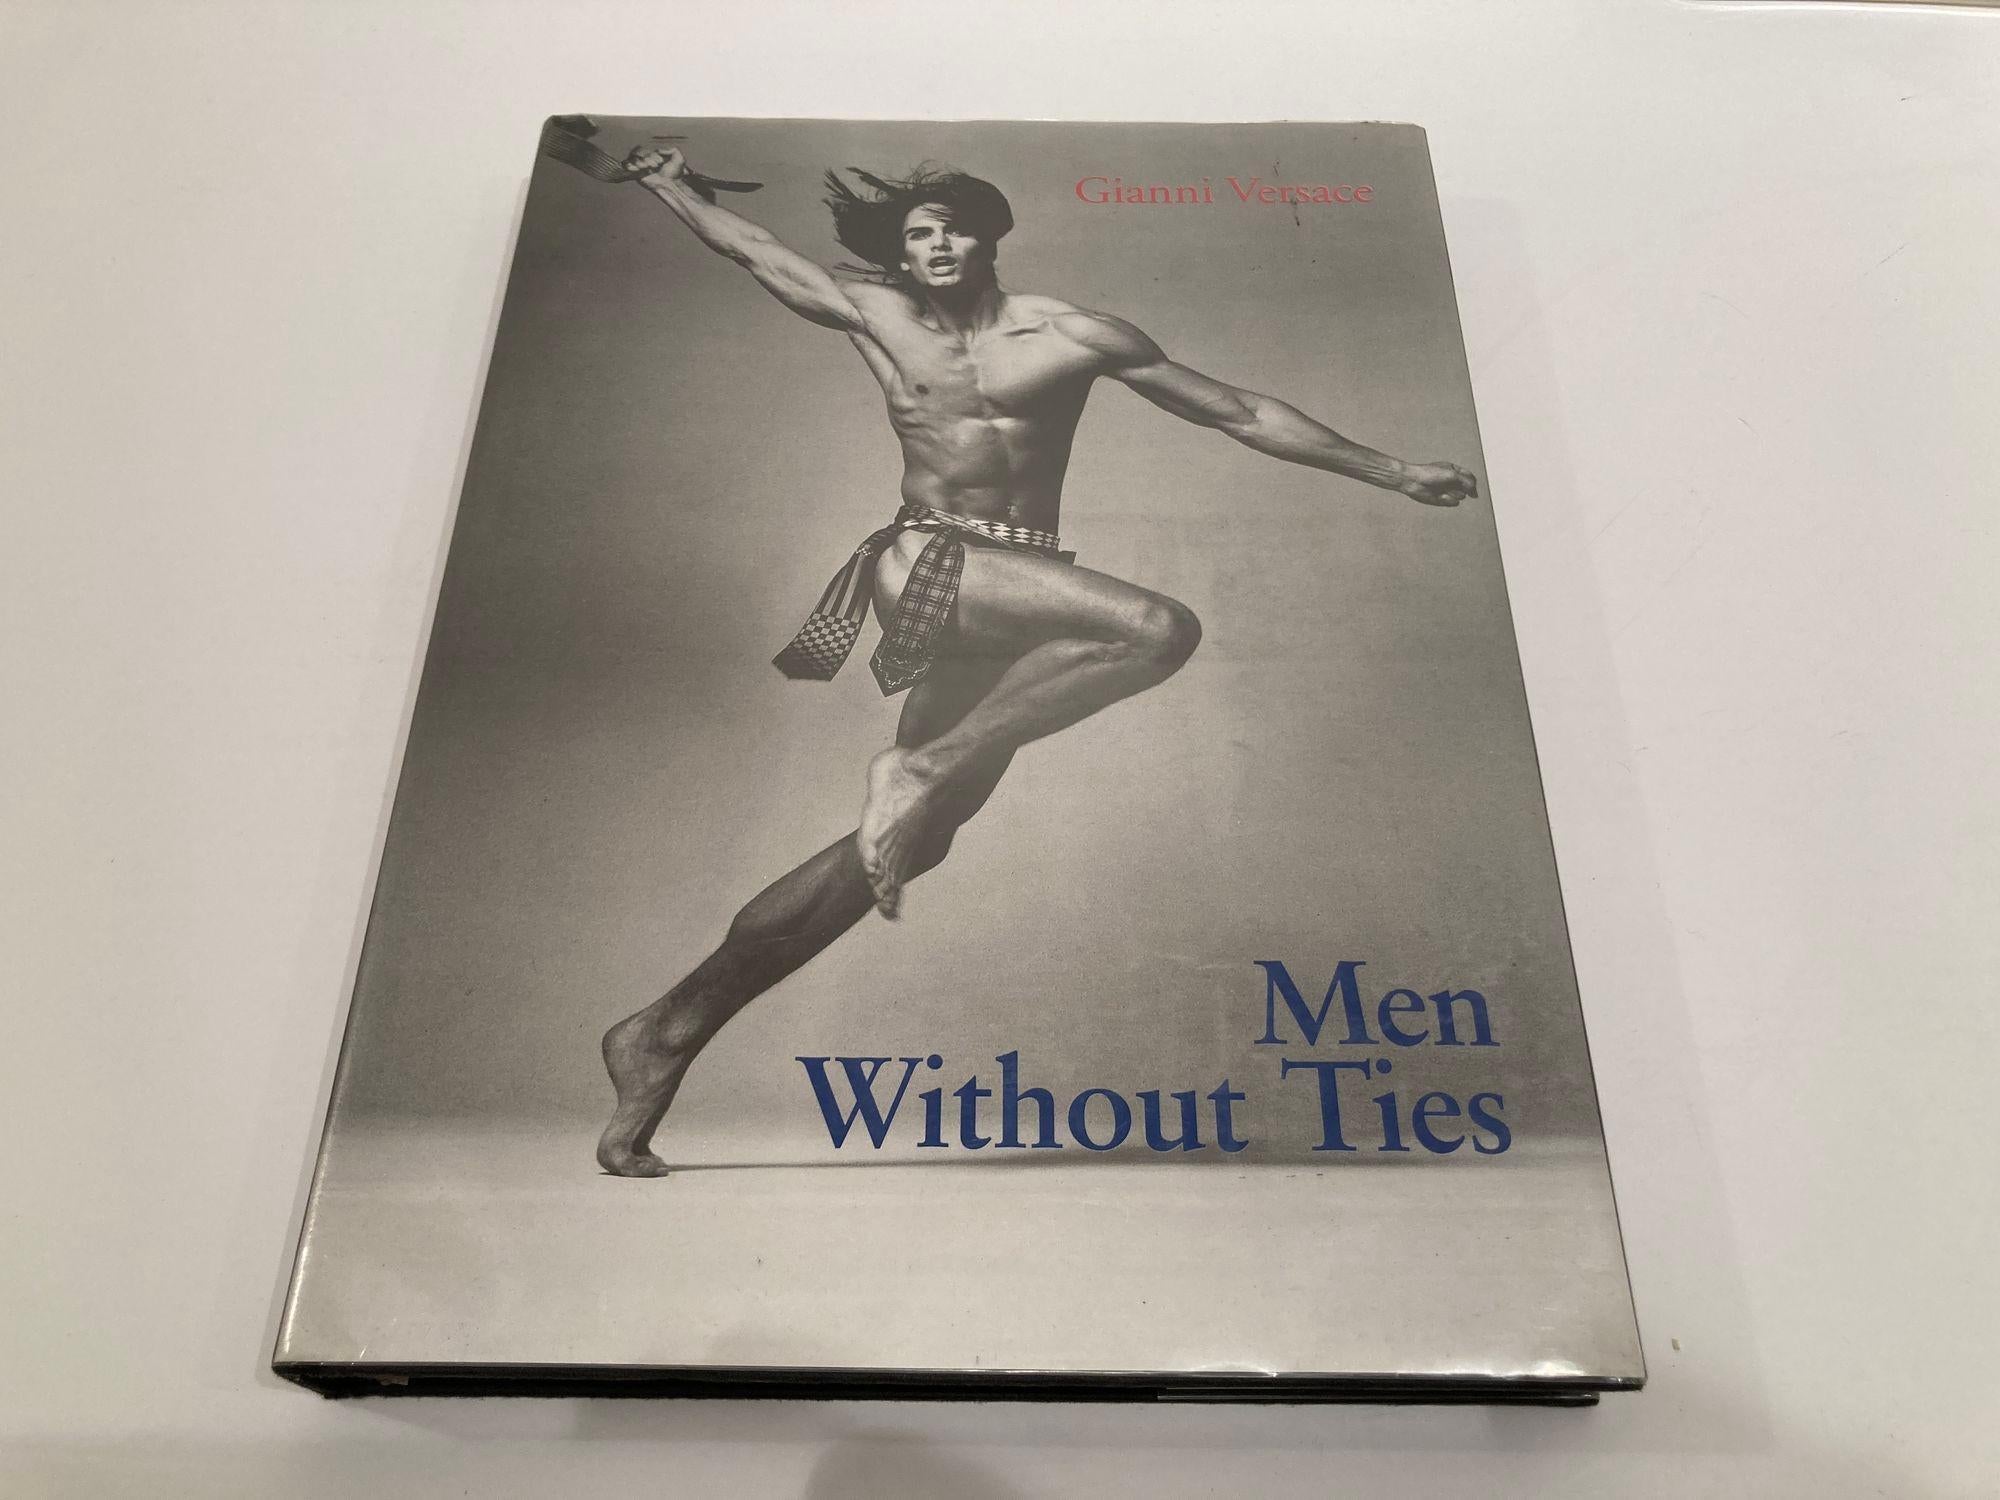 Men Without Ties by Gianni Versace Hardcover Book 1994 1st Edition 4